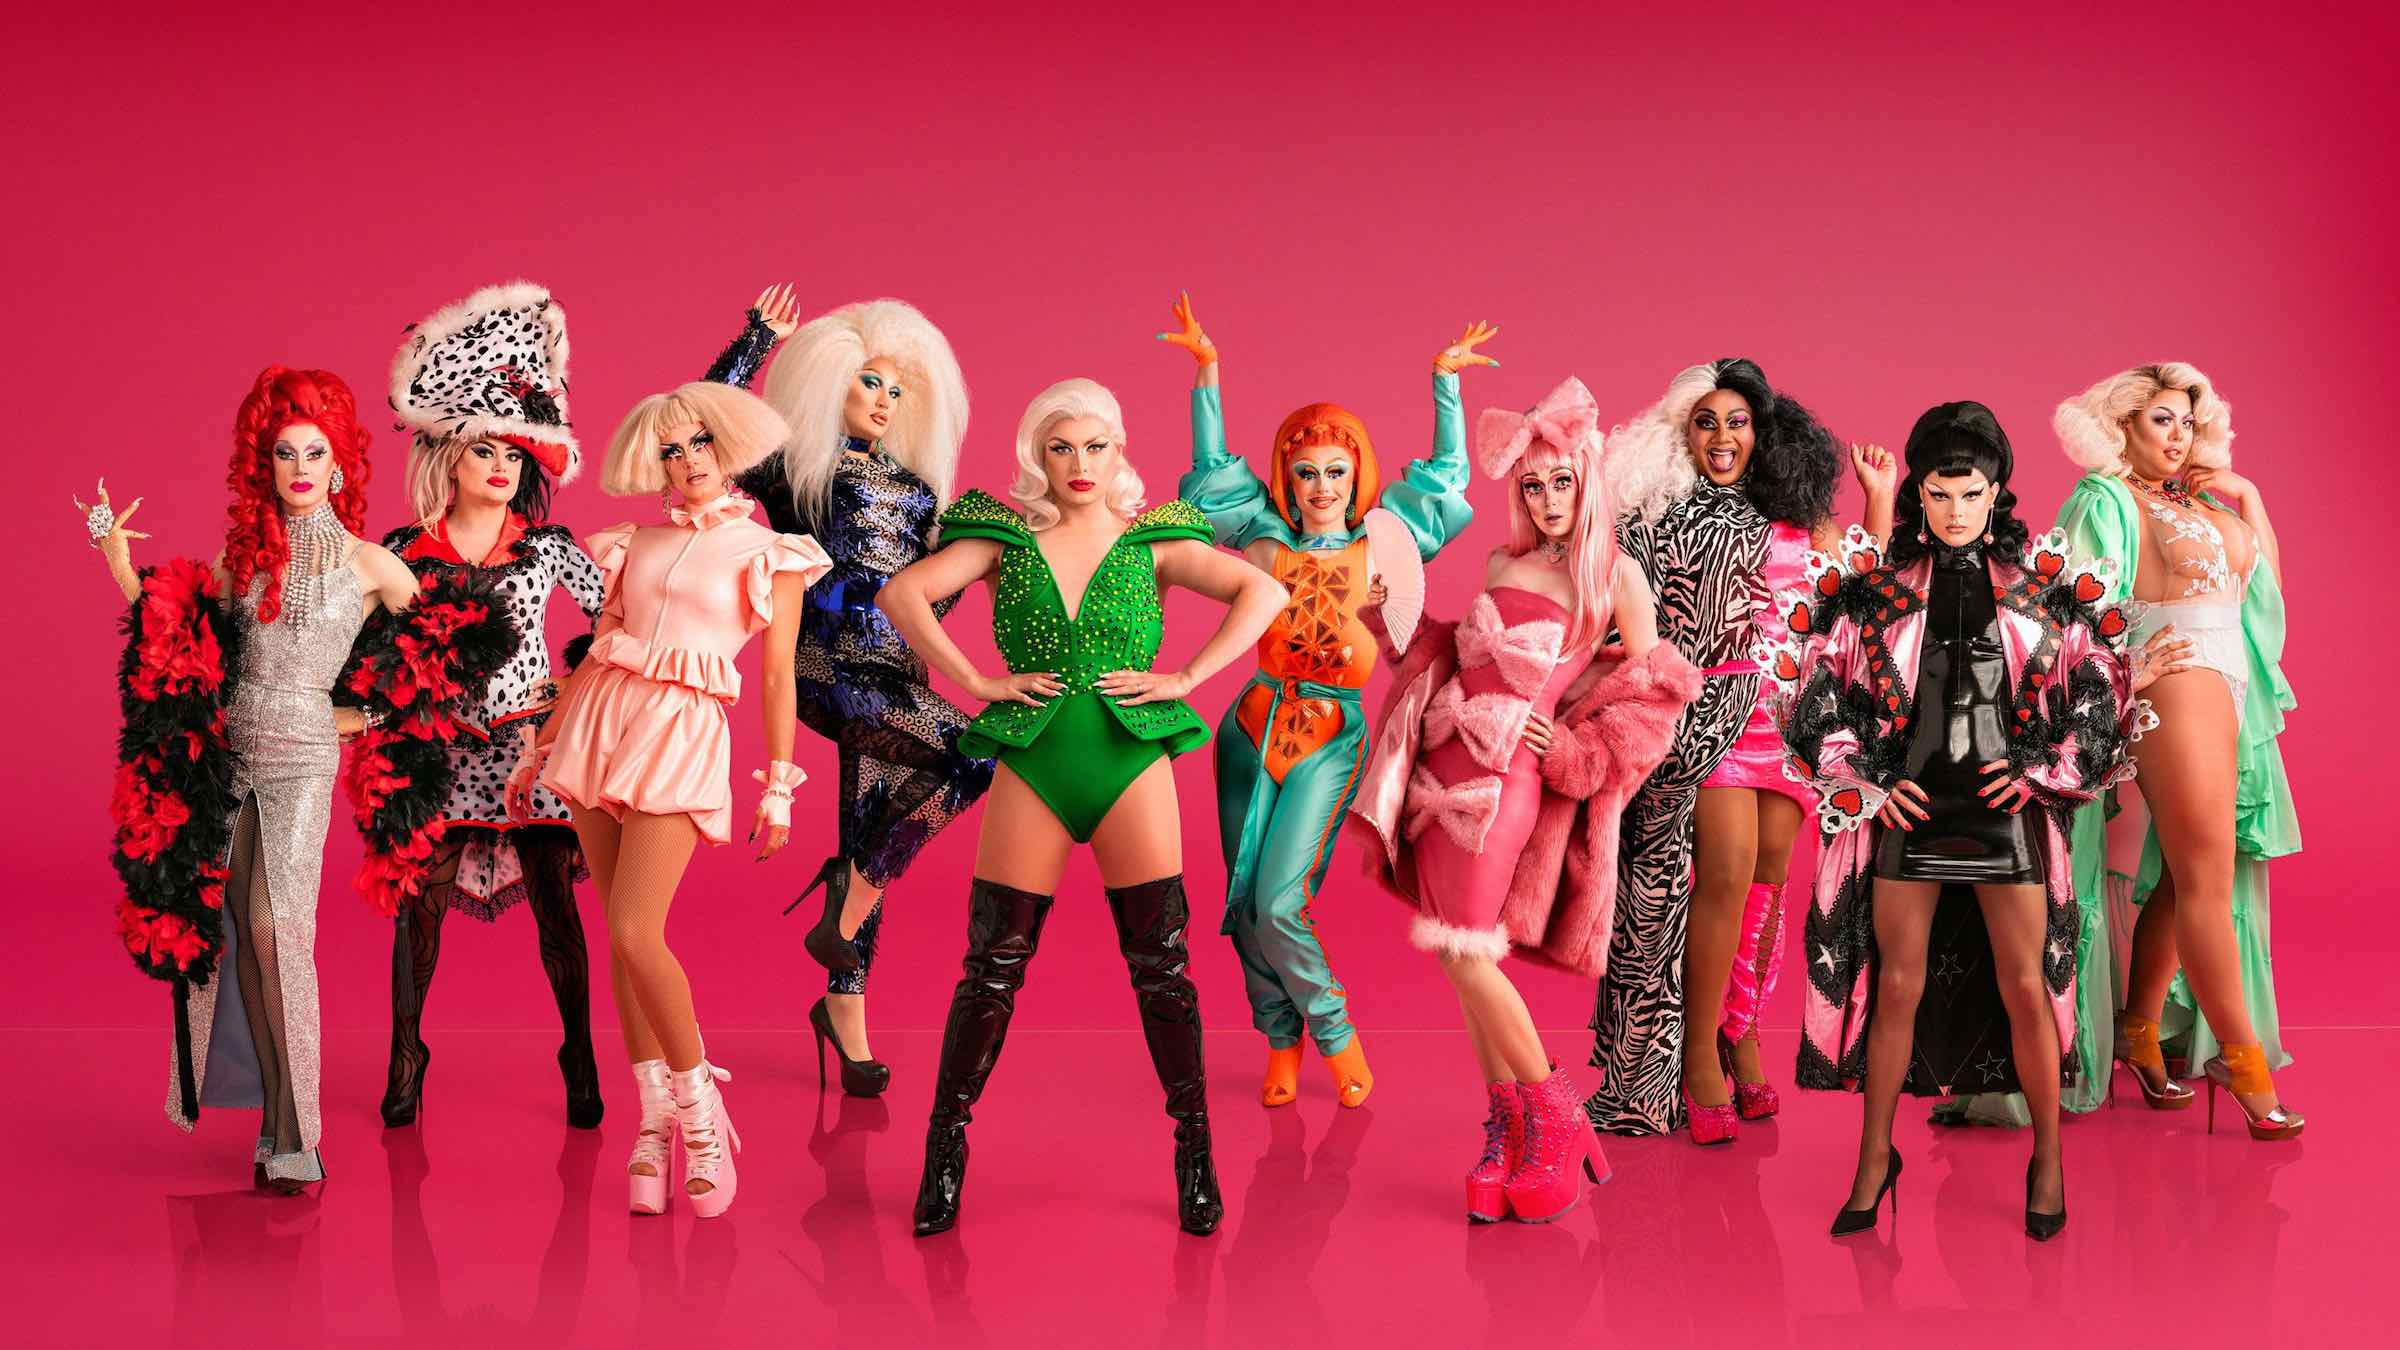 The Vivienne & Baga Chipz from 'RuPaul’s Drag Race UK' star in new WOW Presents+ series 'Morning T&T', in which they reprise their roles from Snatch Game.